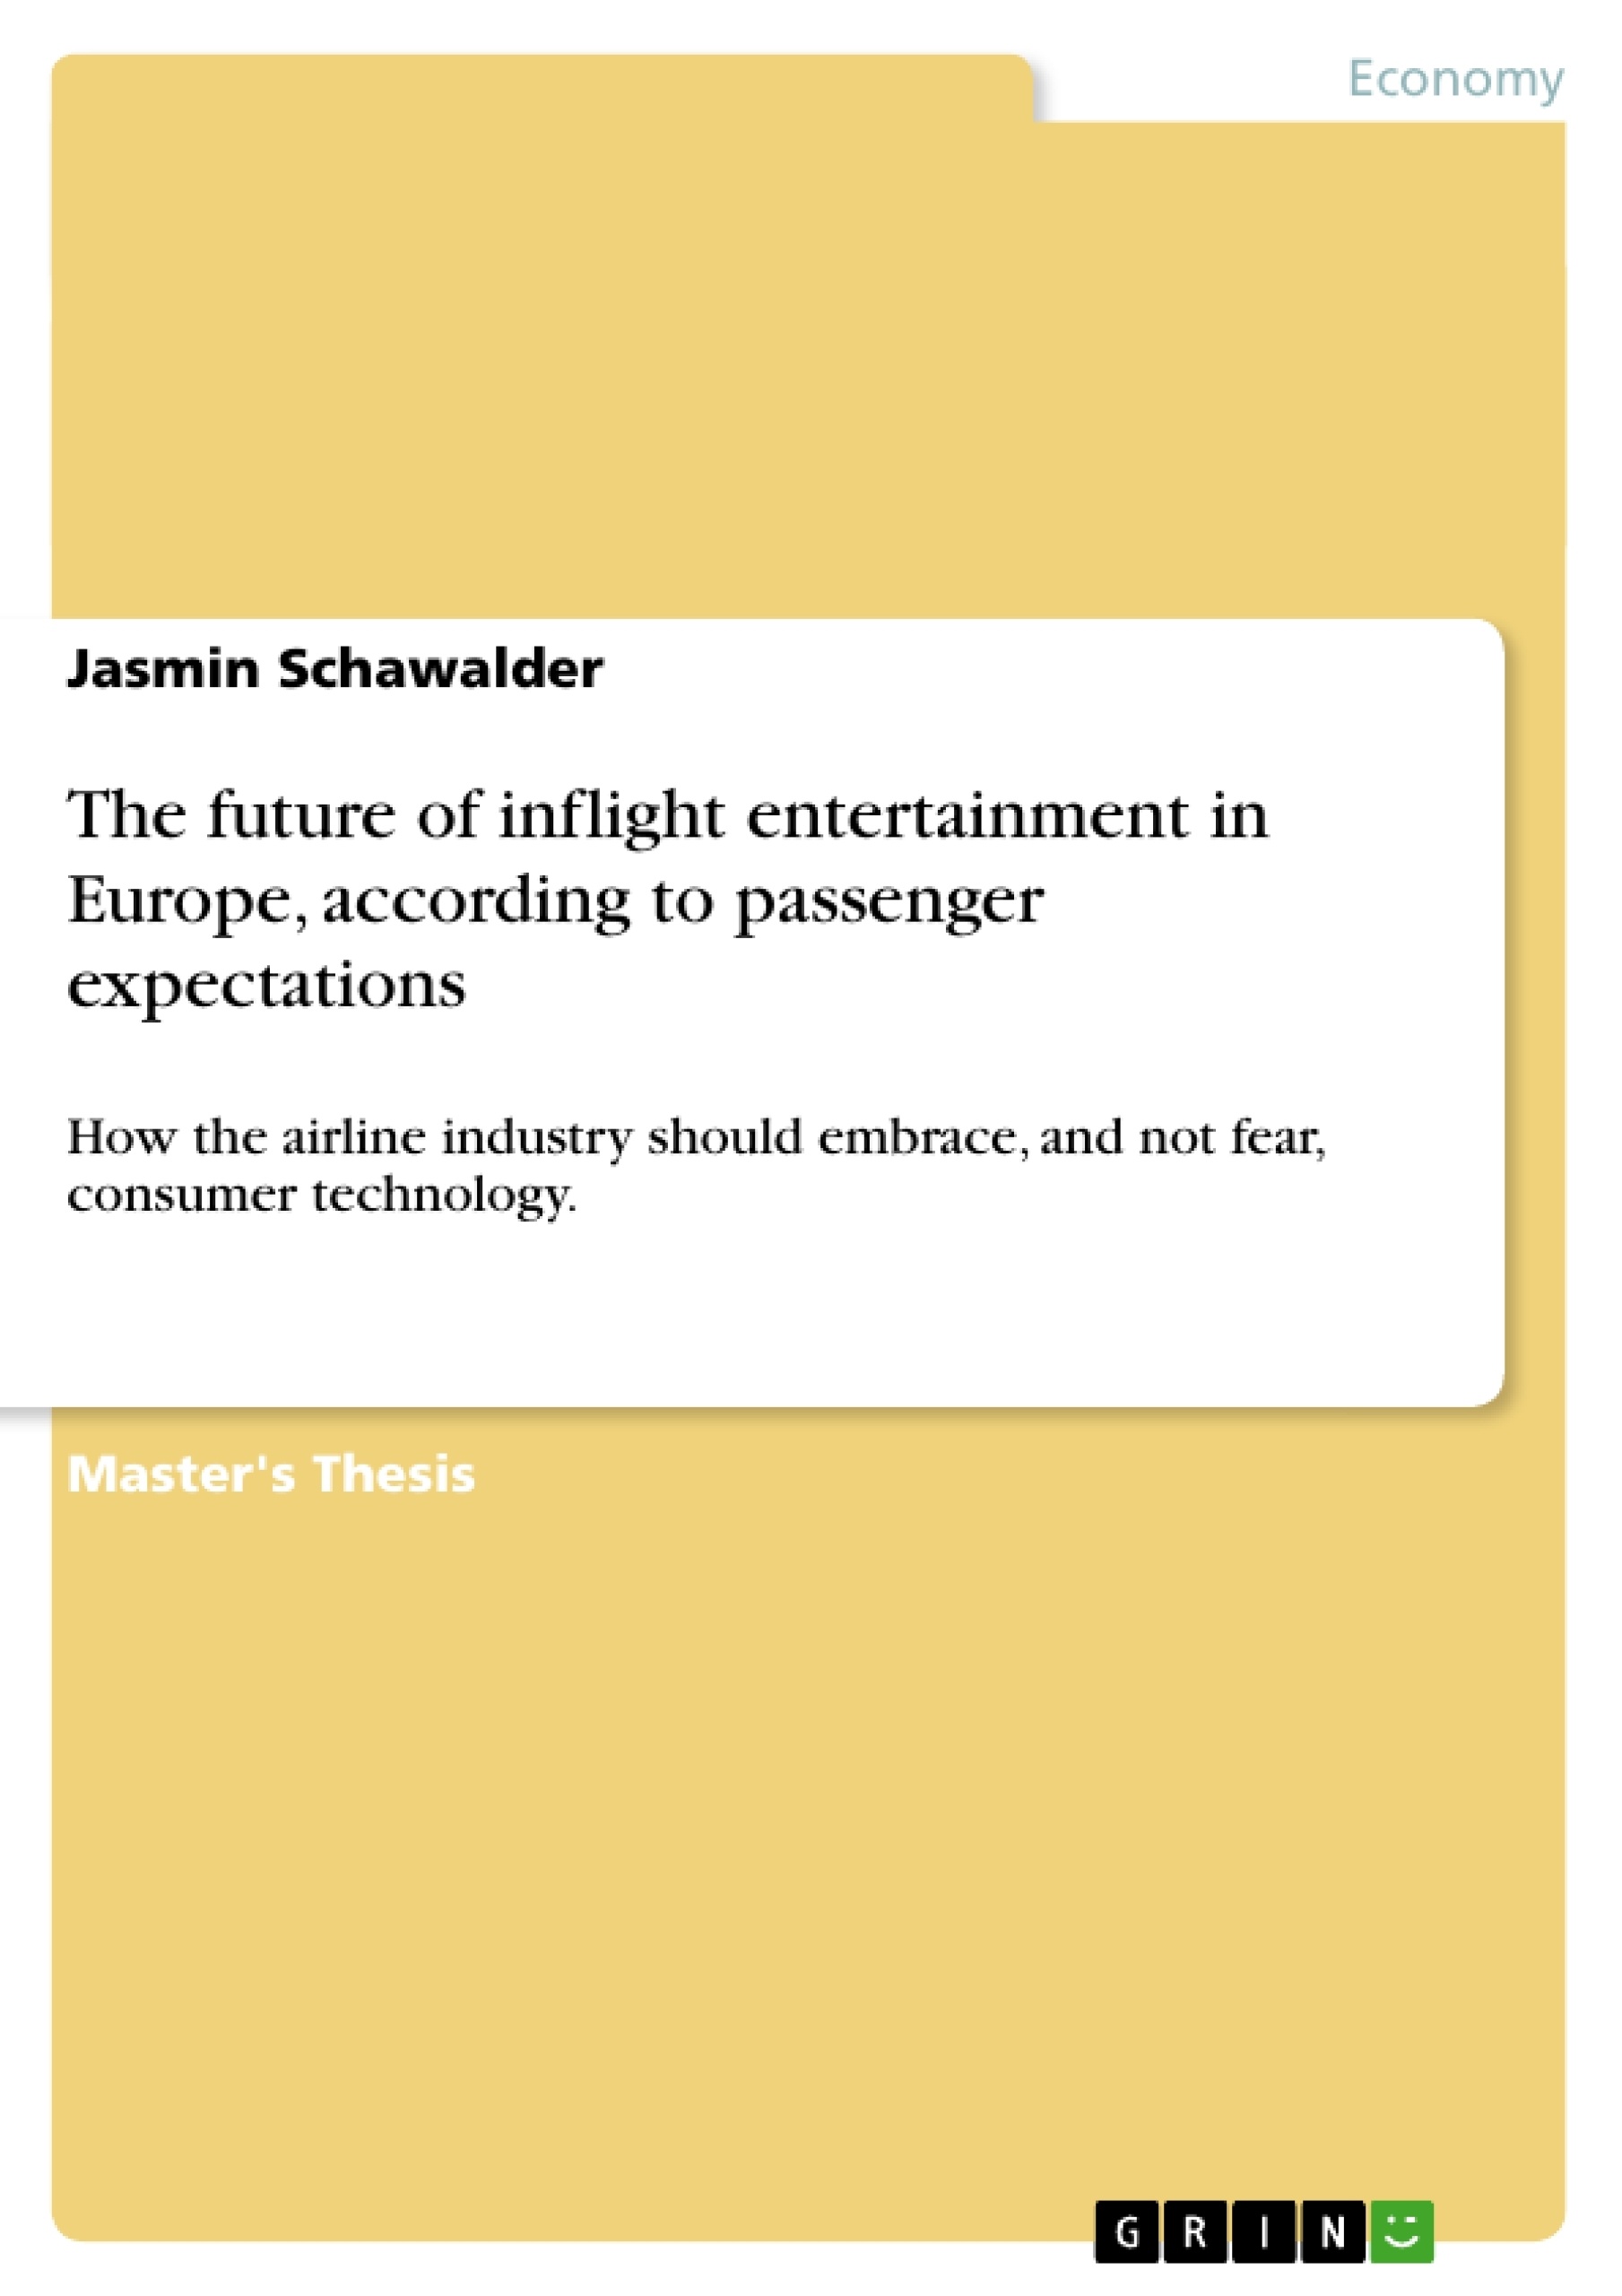 Title: The future of inflight entertainment in Europe, according to passenger expectations